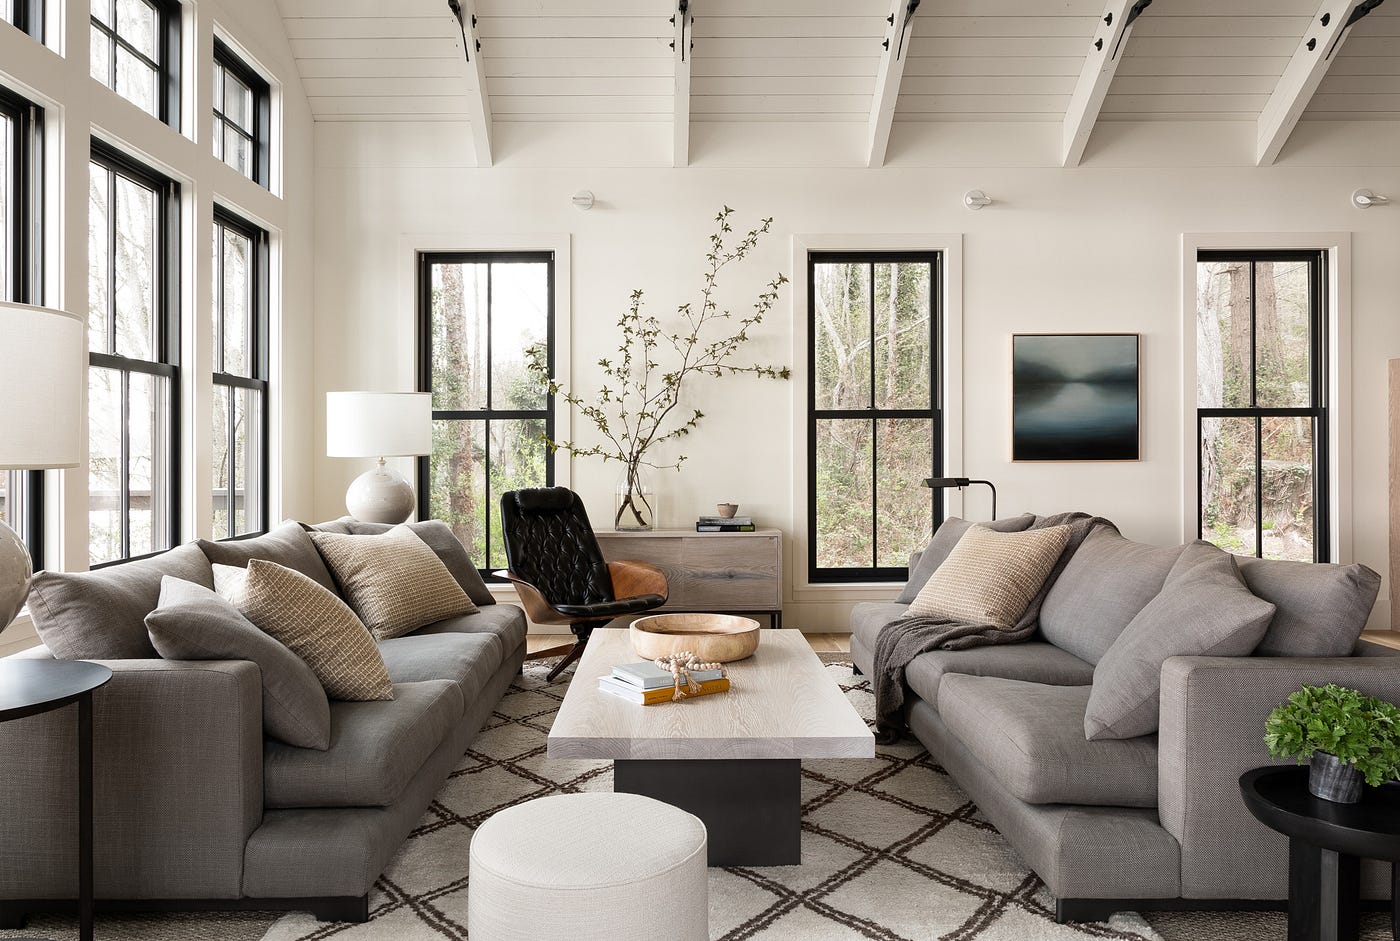 How Can I Make My Living Room Luxurious? 10 Designer Tips